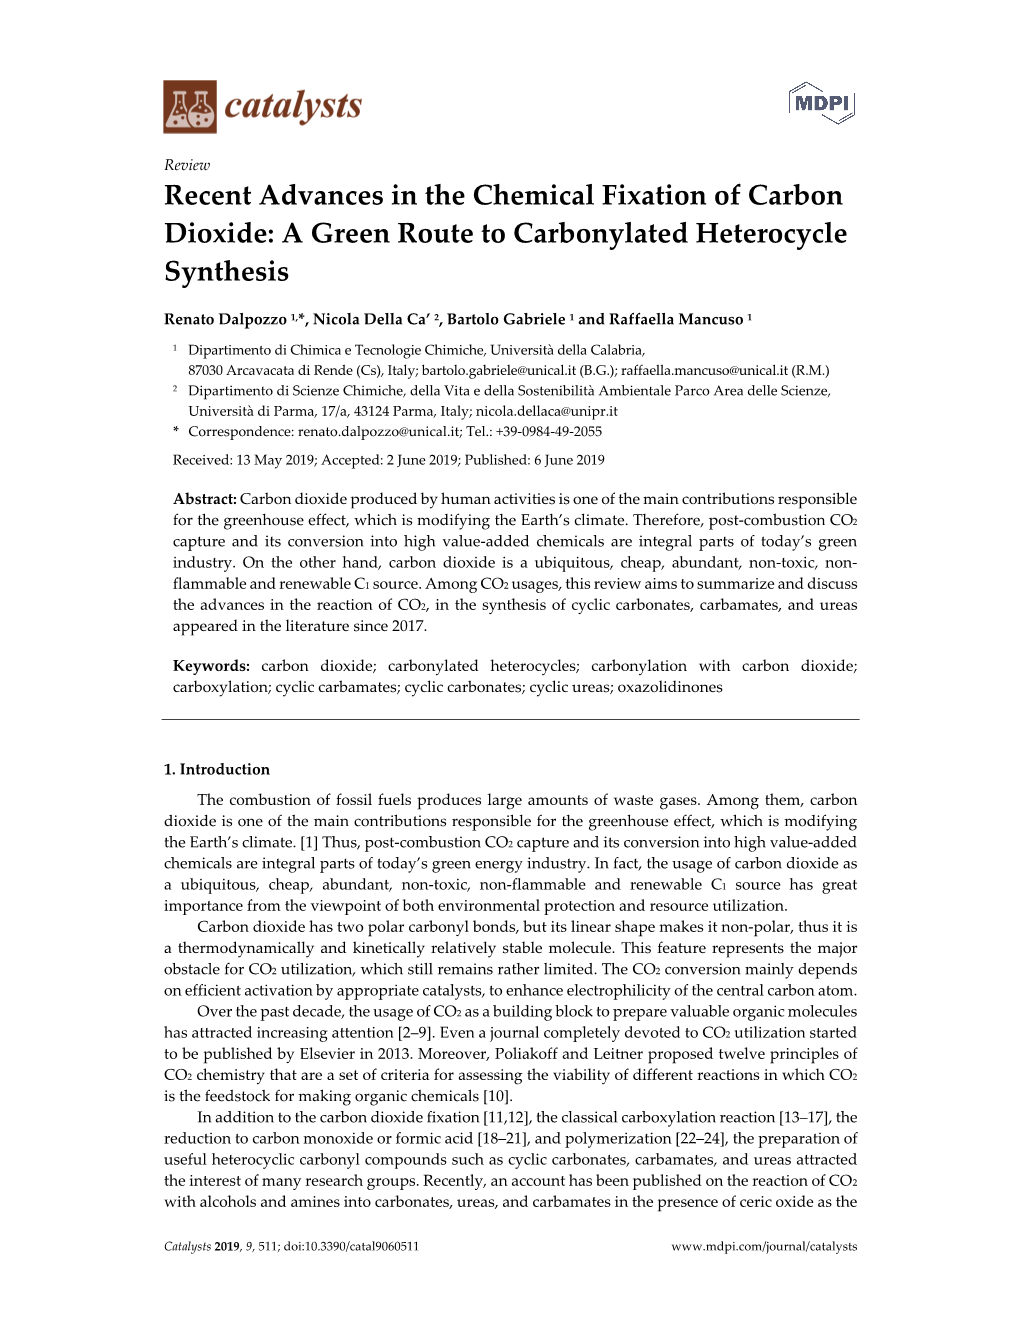 Recent Advances in the Chemical Fixation of Carbon Dioxide: a Green Route to Carbonylated Heterocycle Synthesis